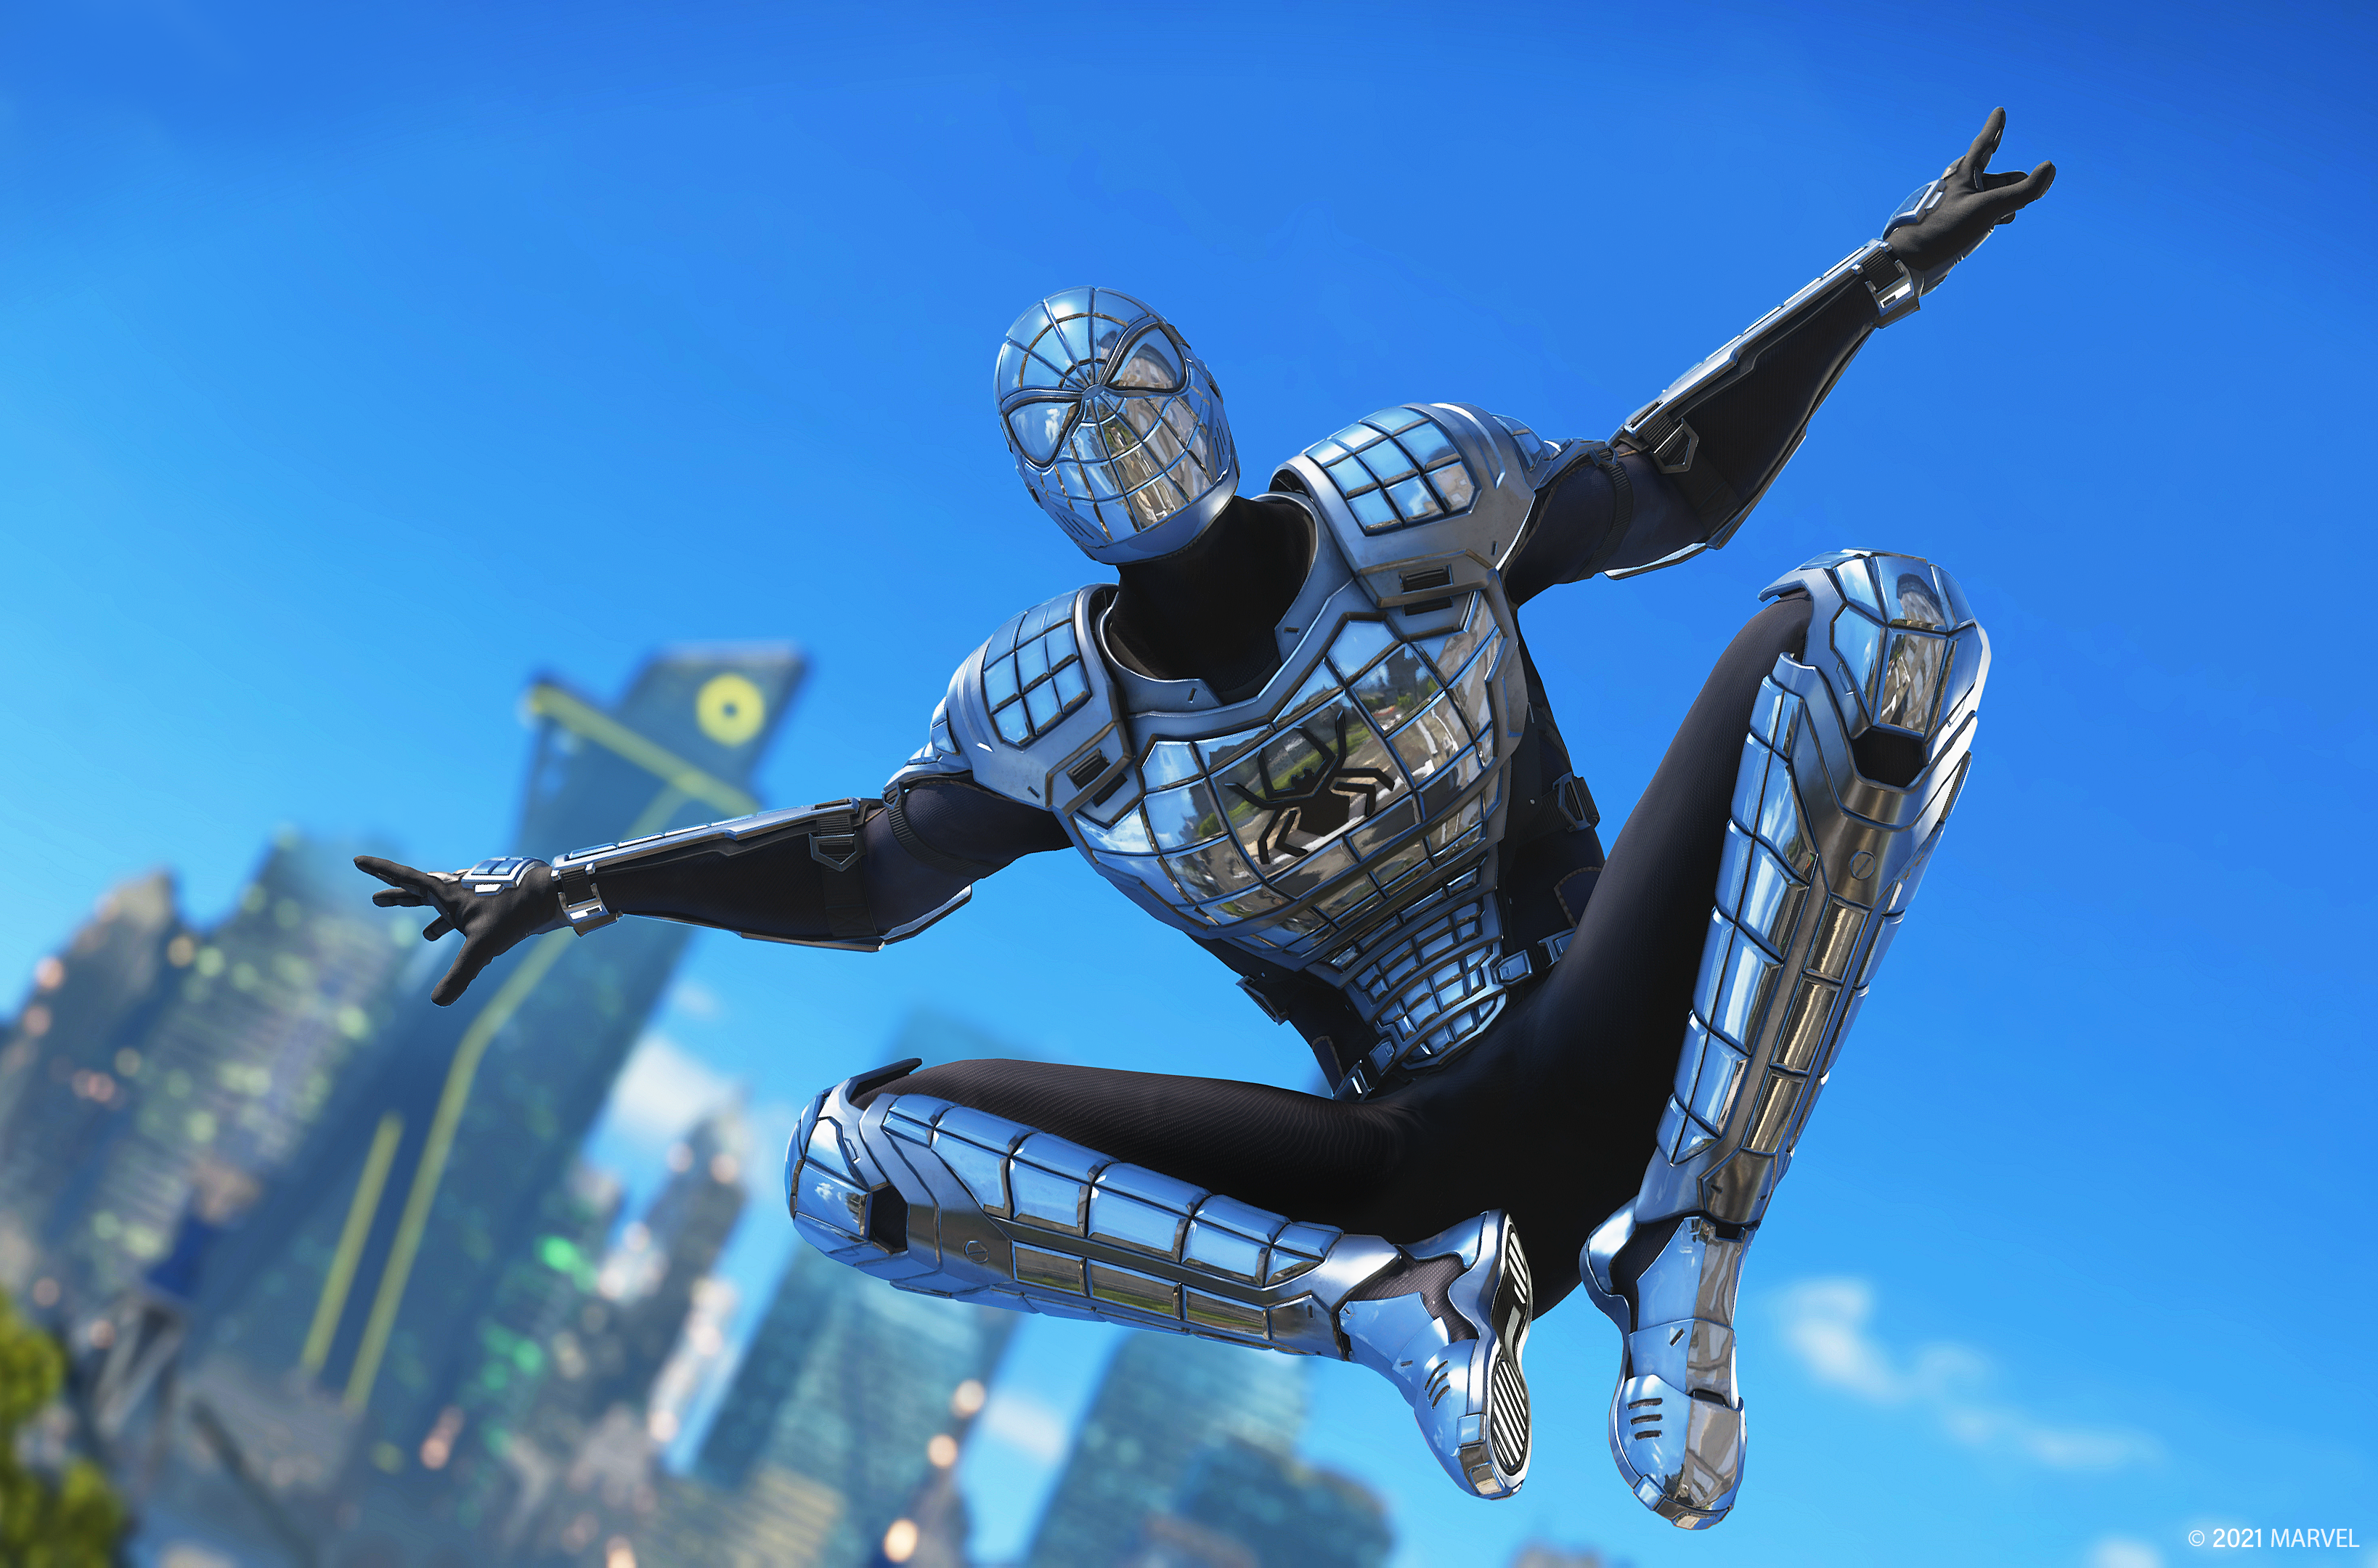 Spider-Man-Armour-Mark-I-Suit